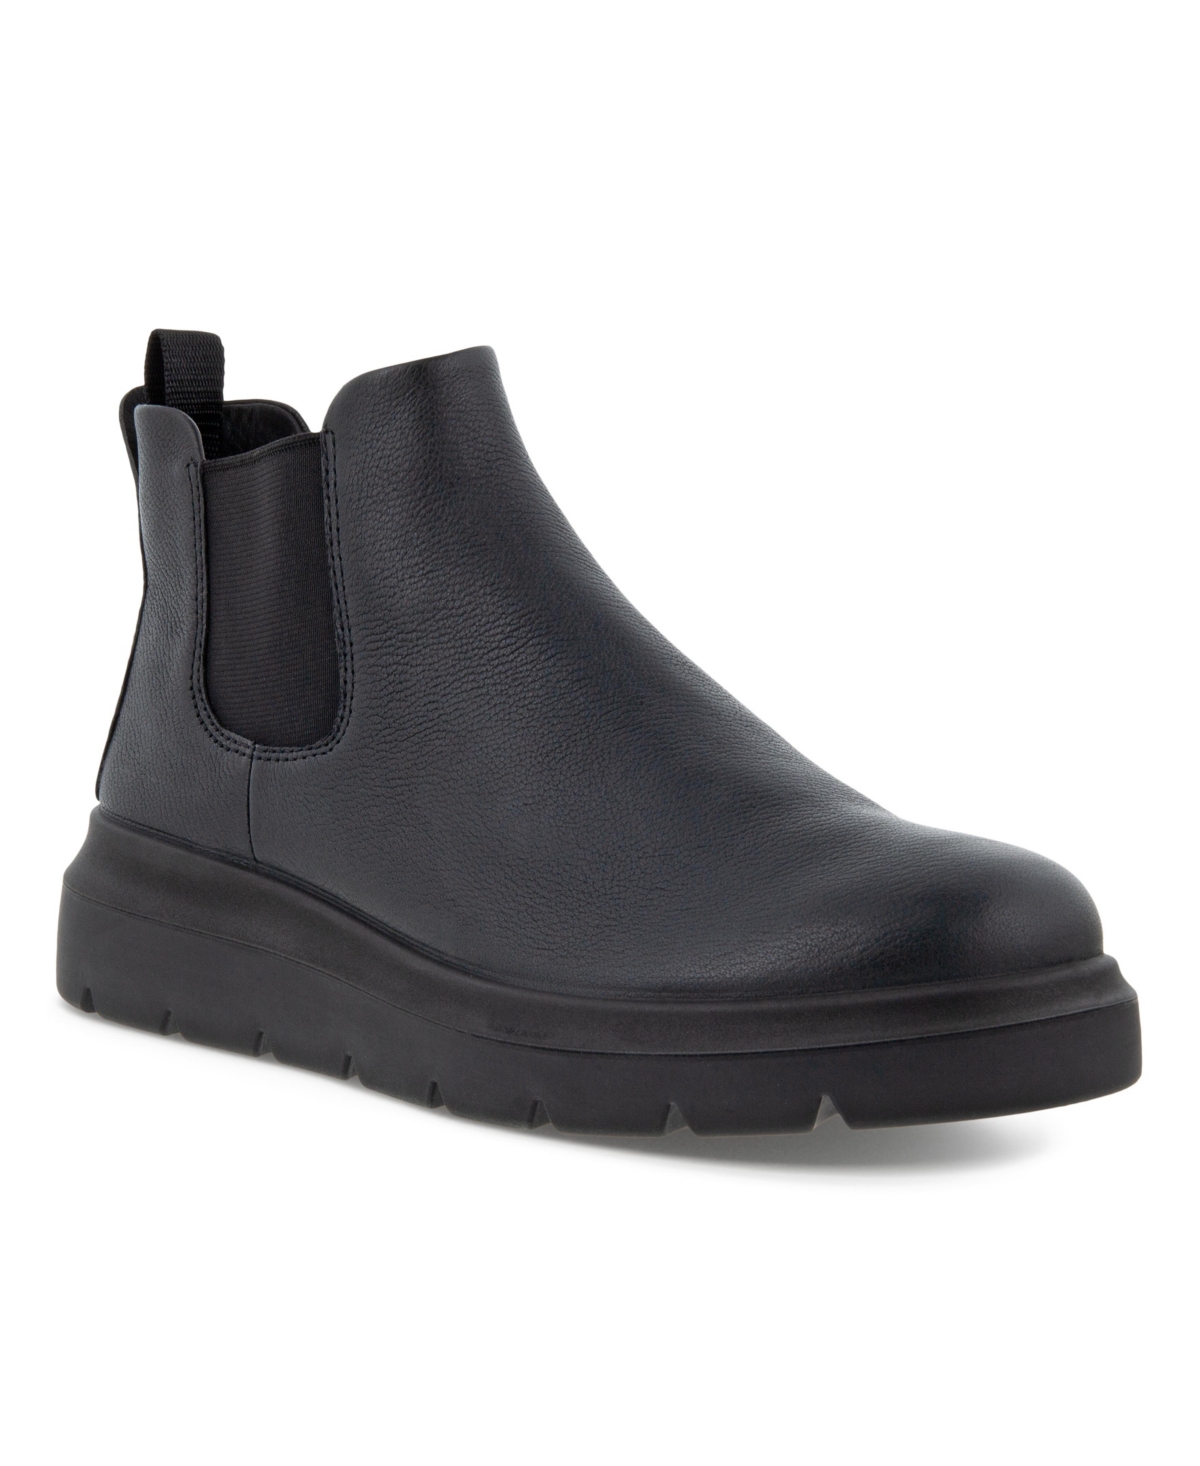 UPC 194890905023 product image for Ecco Women's Nouvelle Chelsea Nubuck Leather Boot Women's Shoes | upcitemdb.com